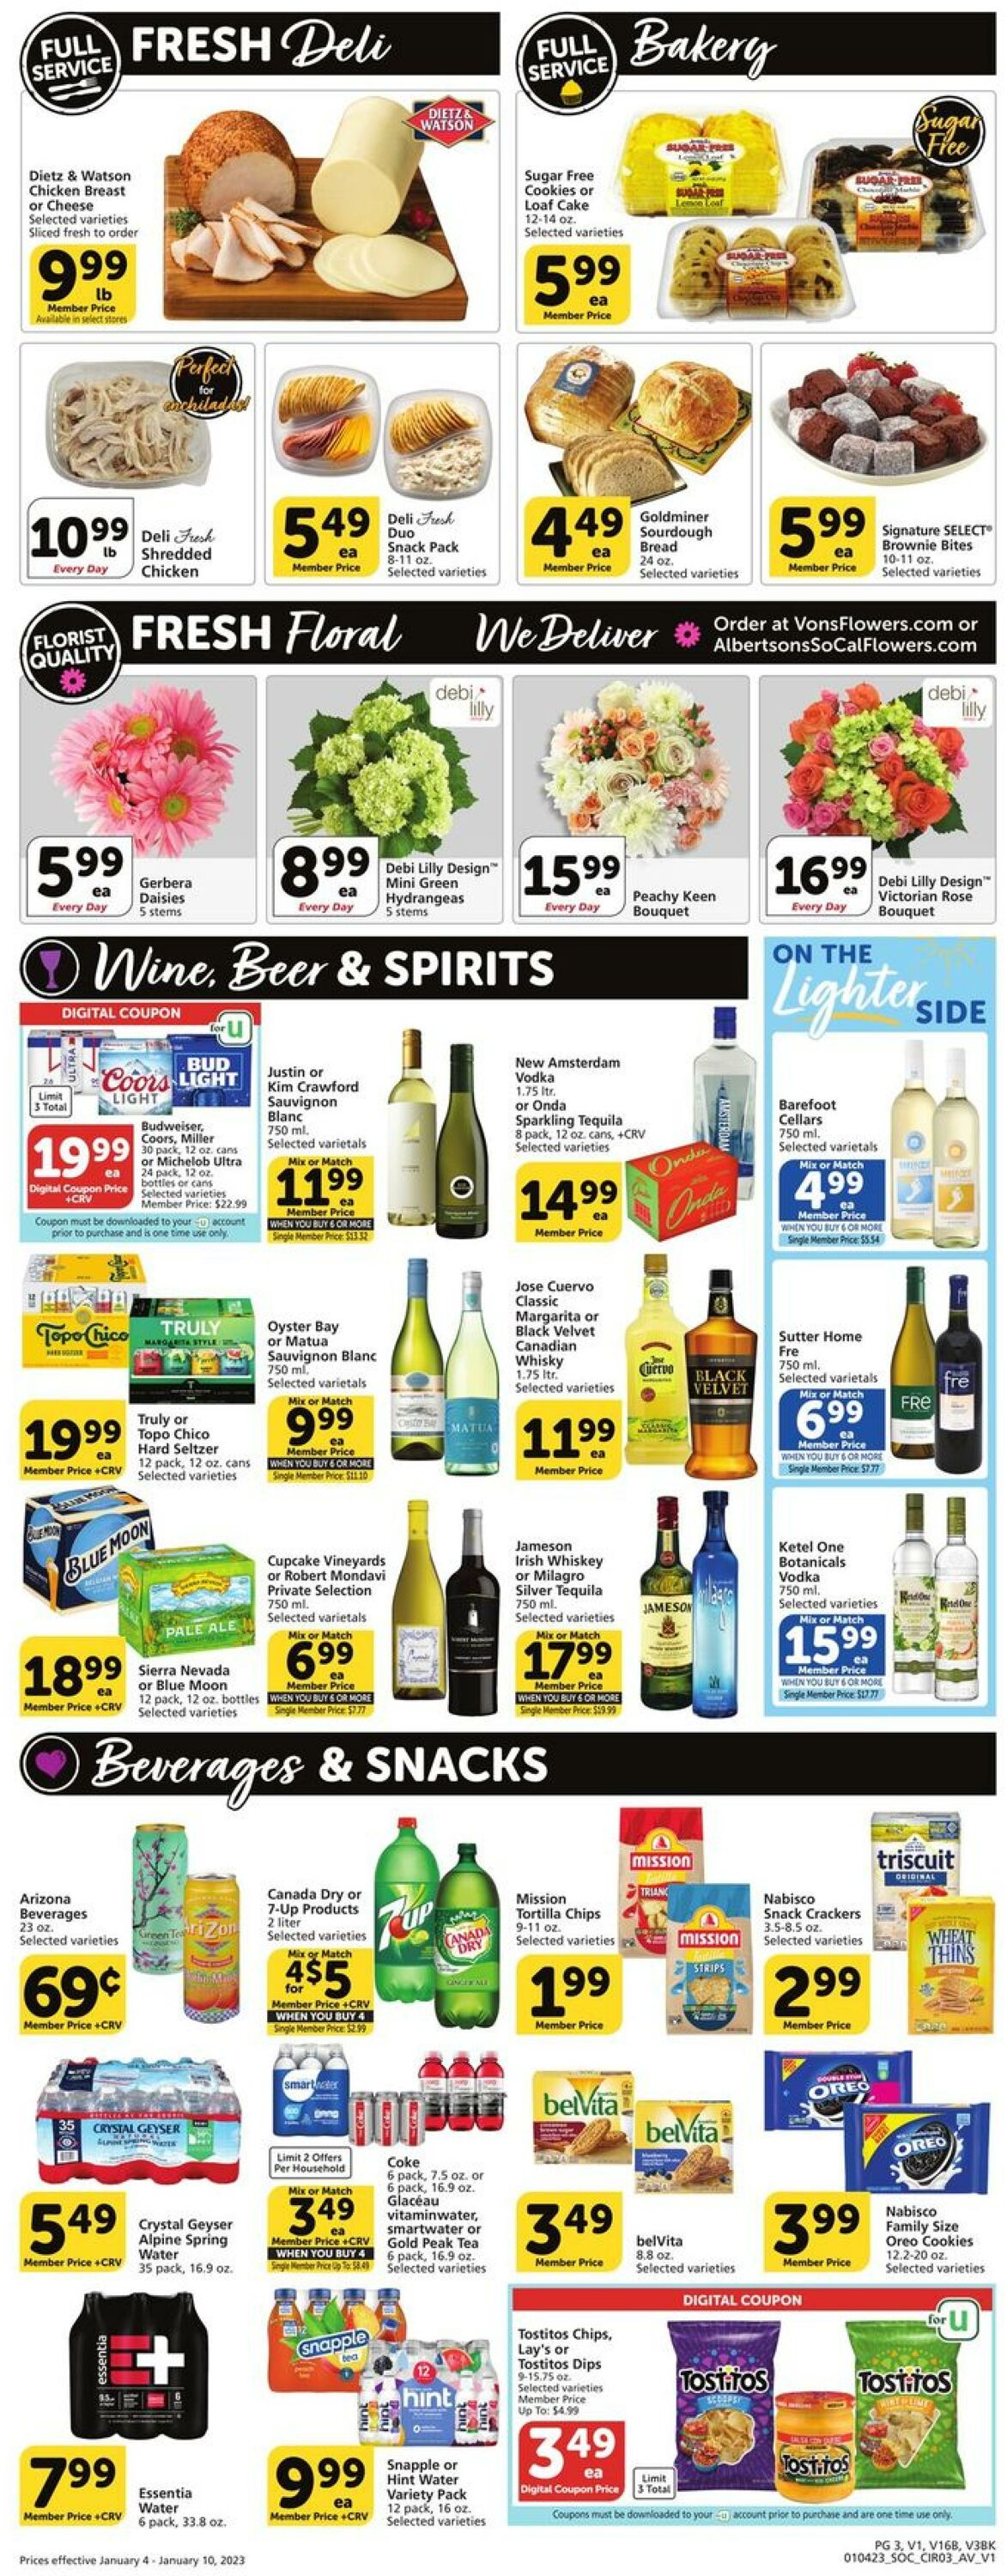 Weekly ad Vons 01/04/2023 - 01/10/2023